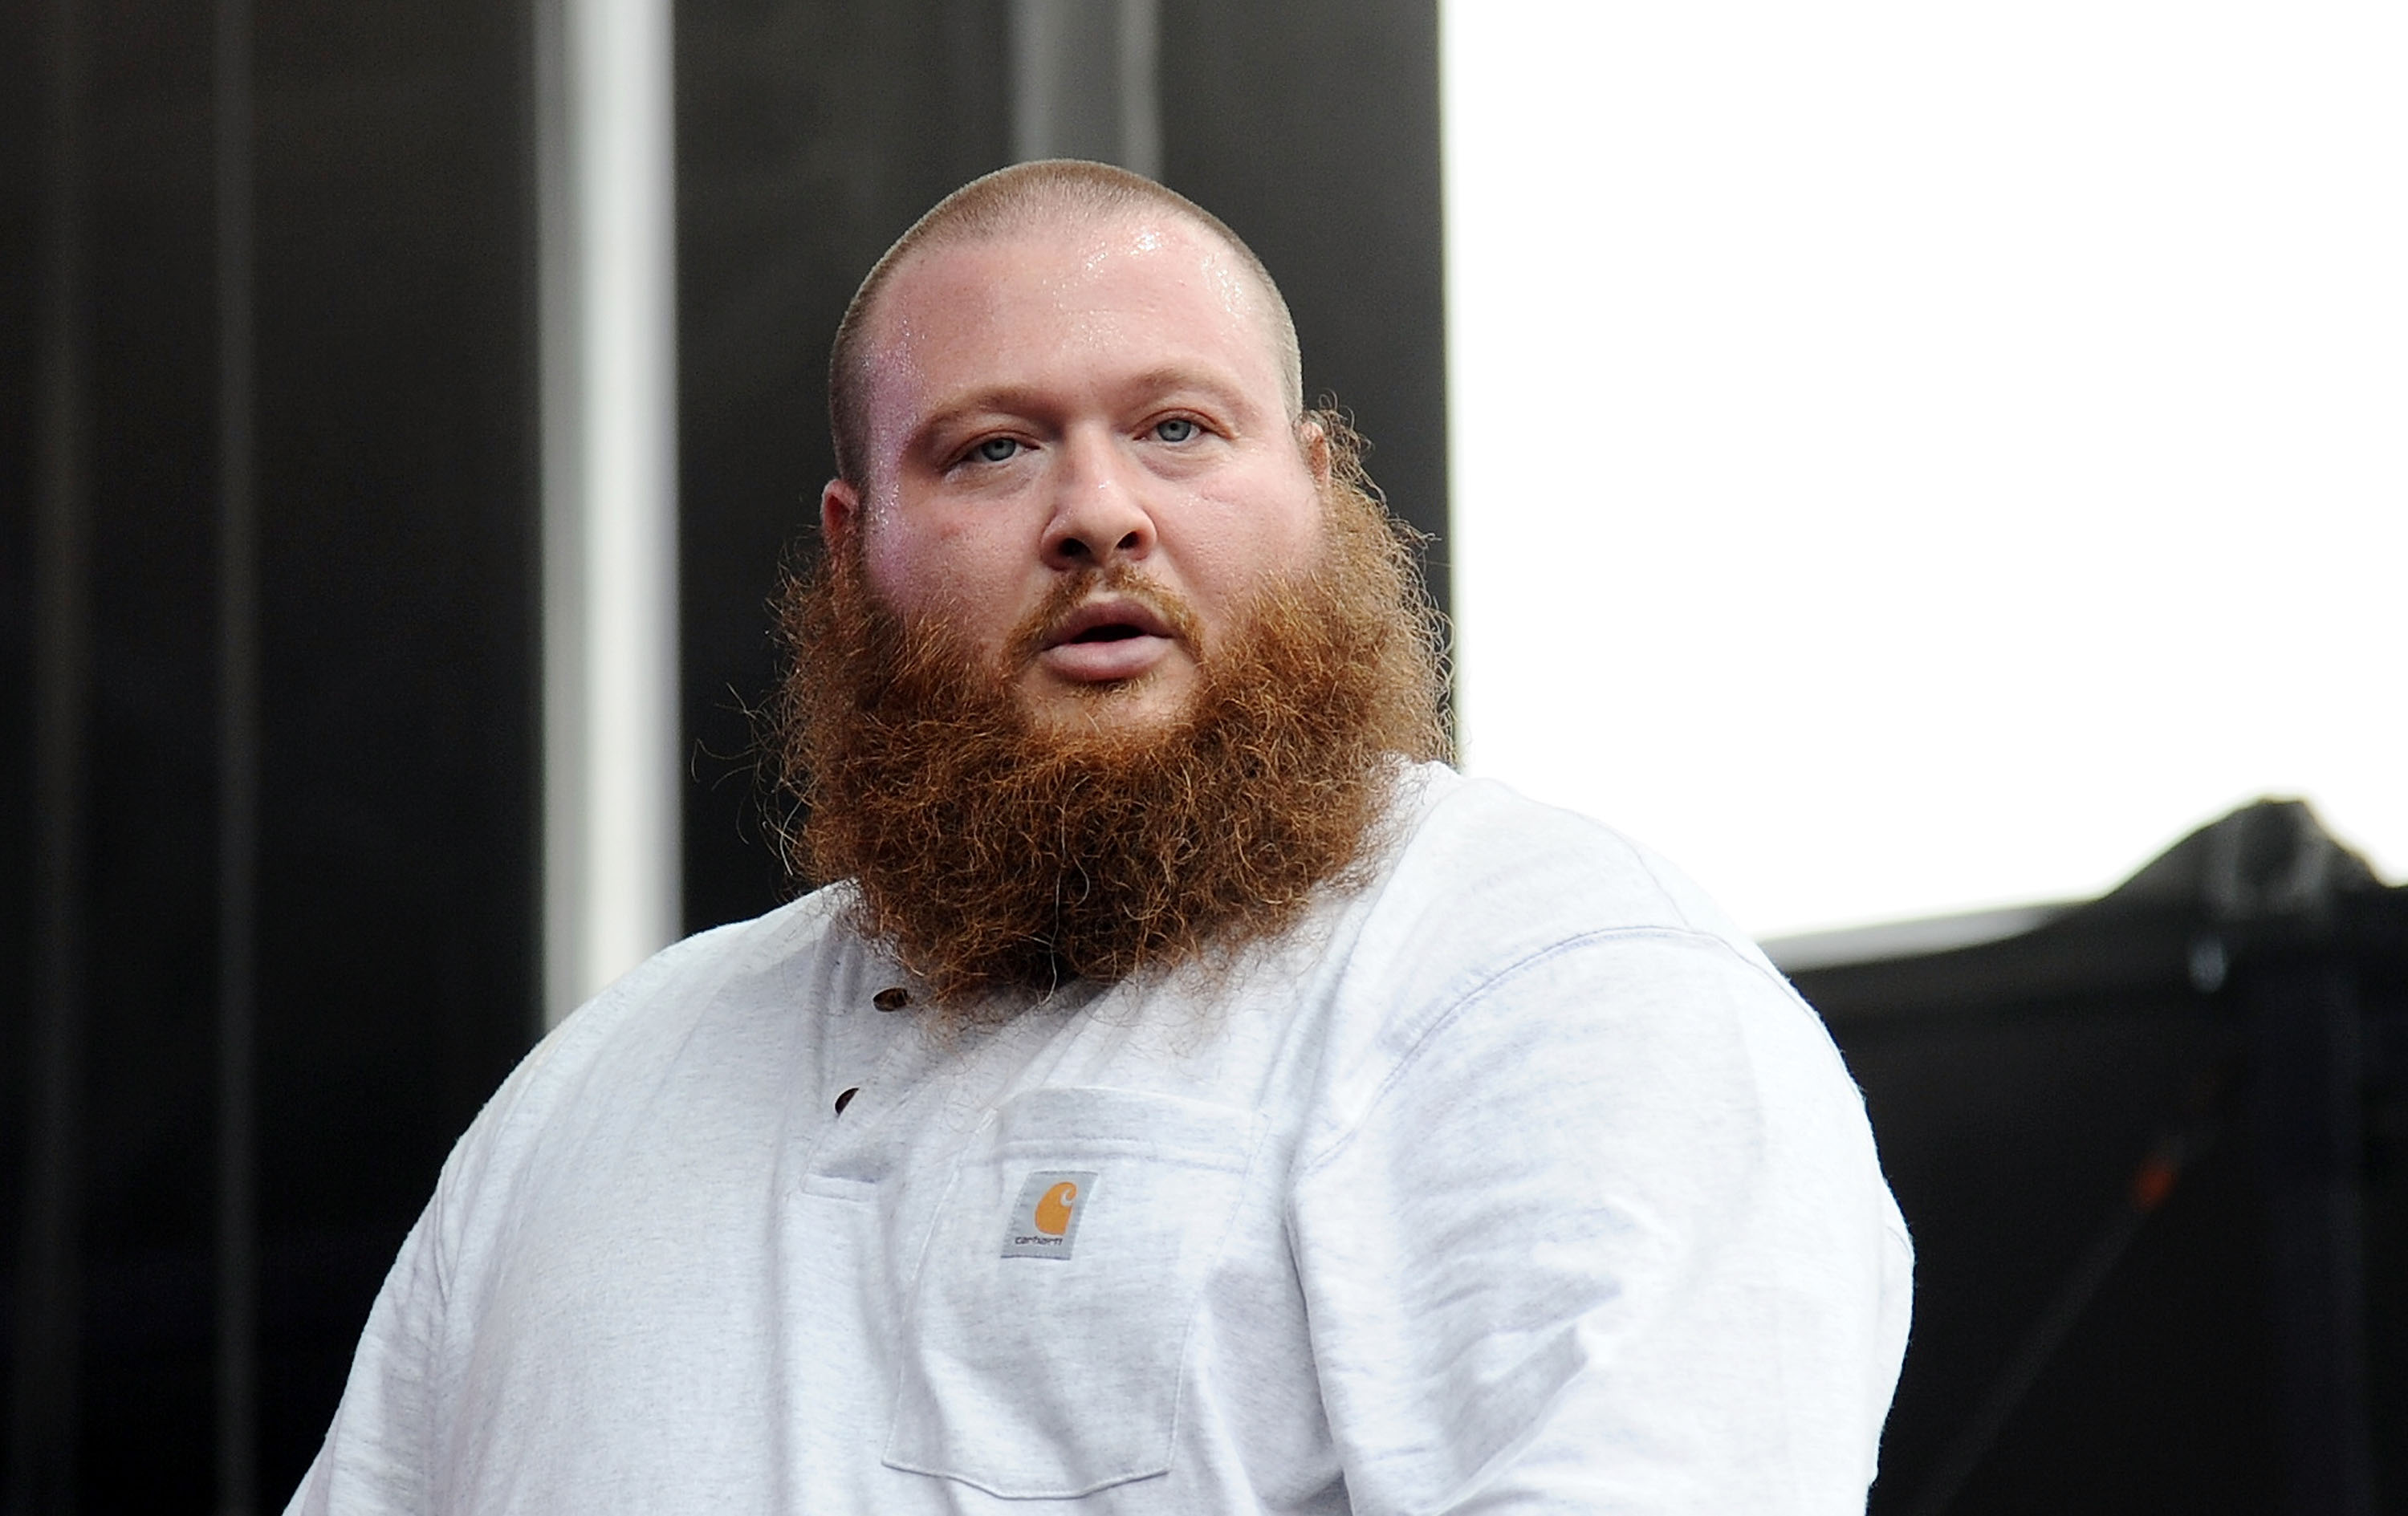 Action Bronson -- "I'm Going Down" (Rose Royce Cover)